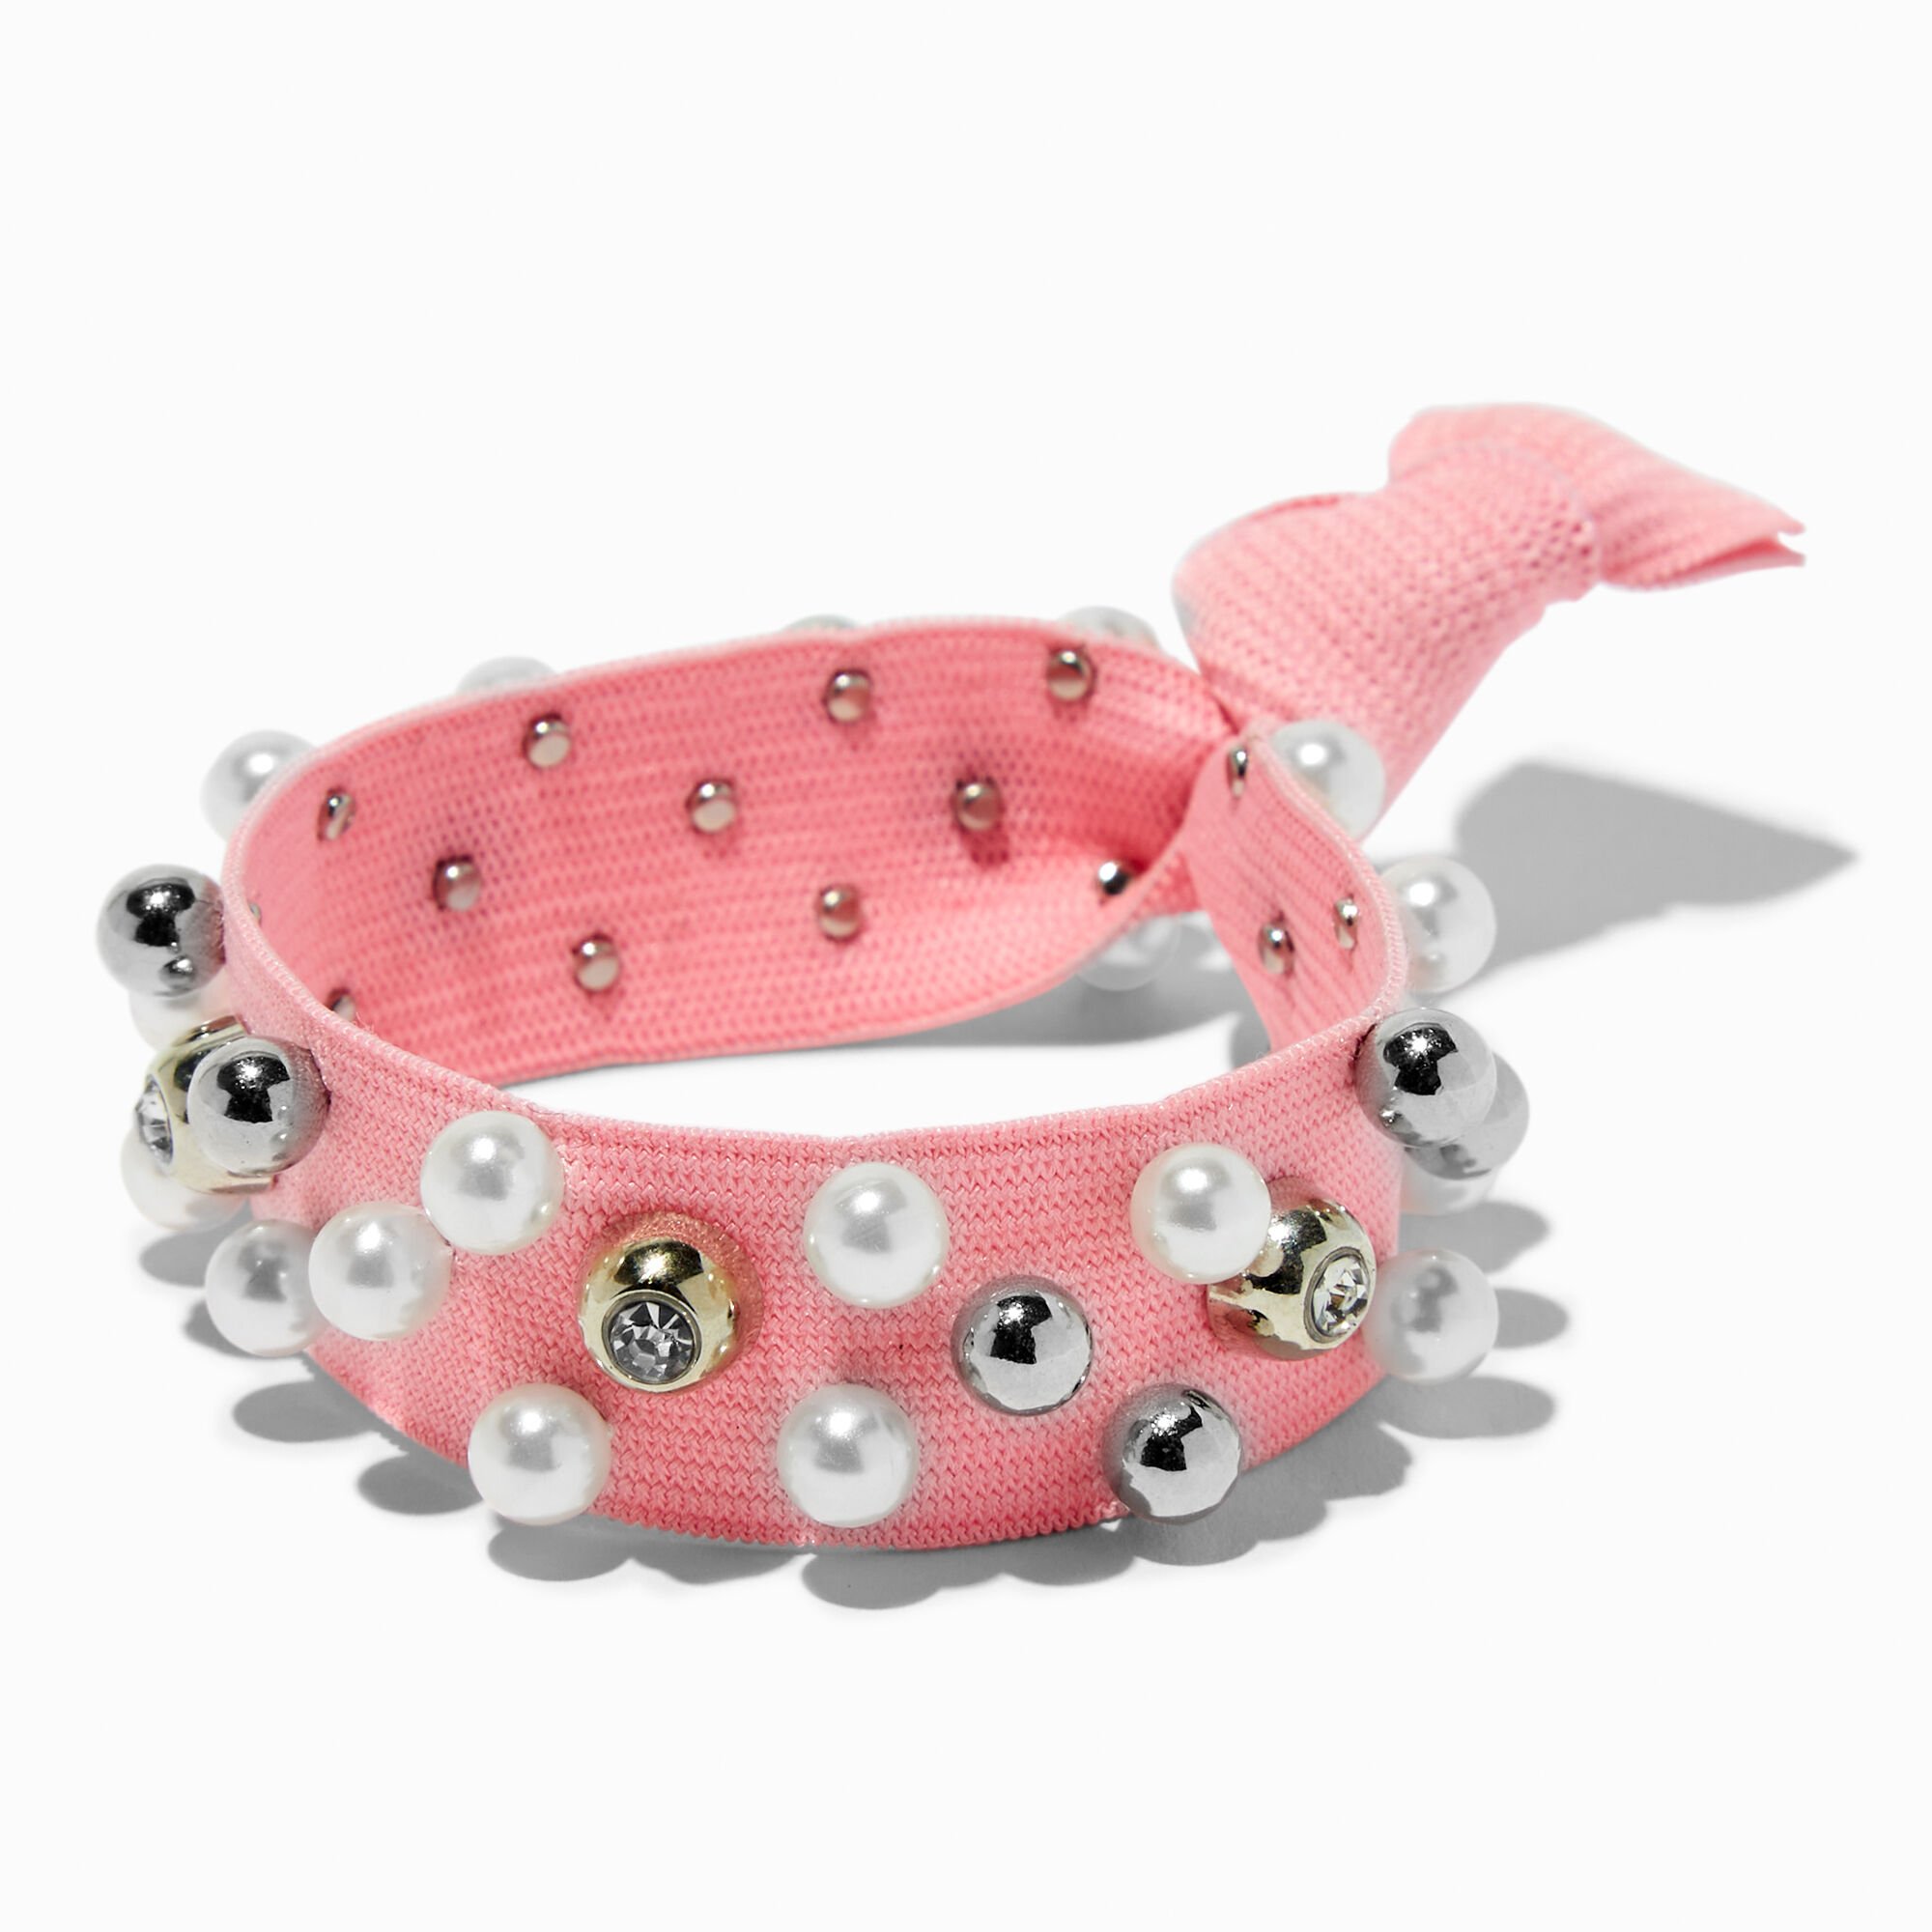 View Claires PearlEmbellished Blush Hair Tie Pink information